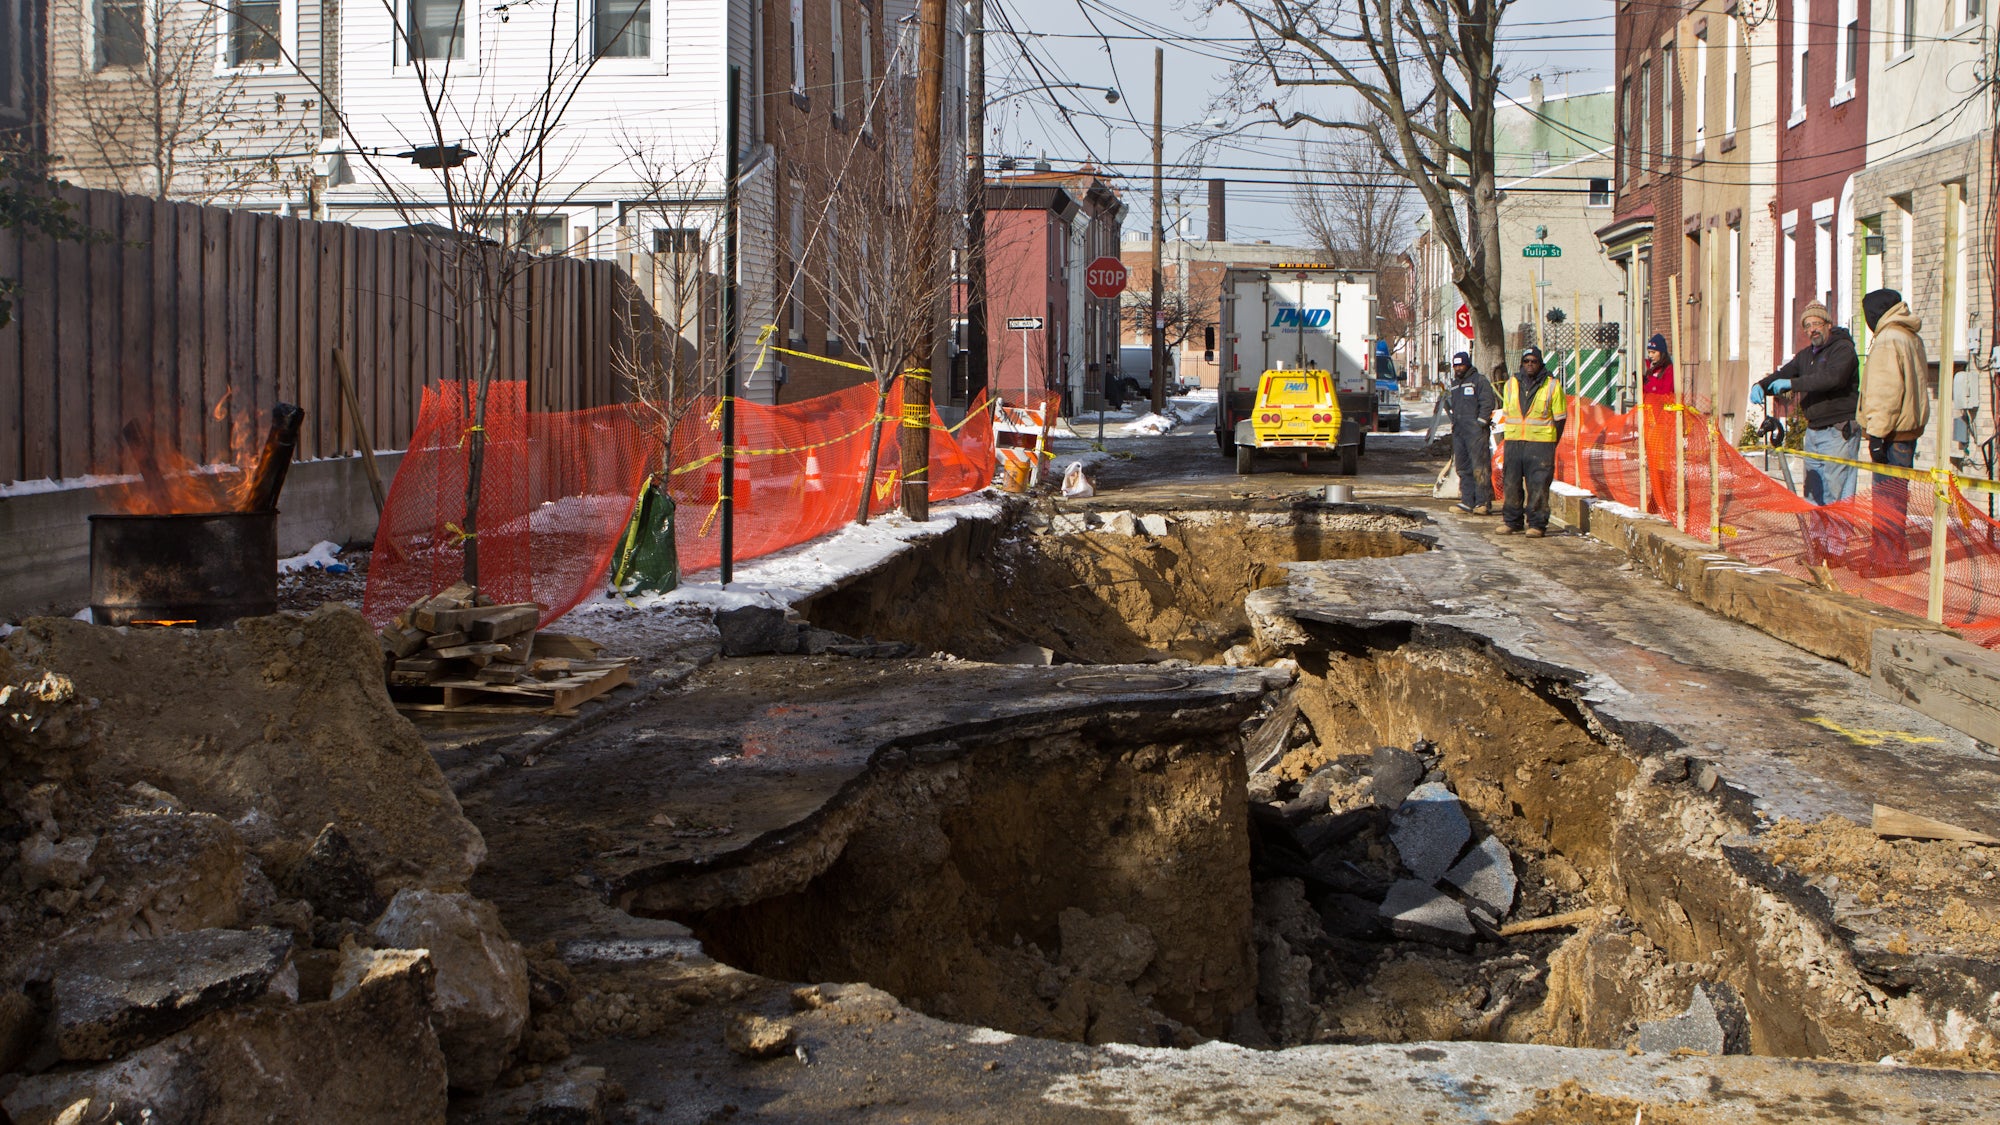 A sinkhole is under repair at the 2300 block of East Boston Street. (Kimberly Paynter/WHYY)